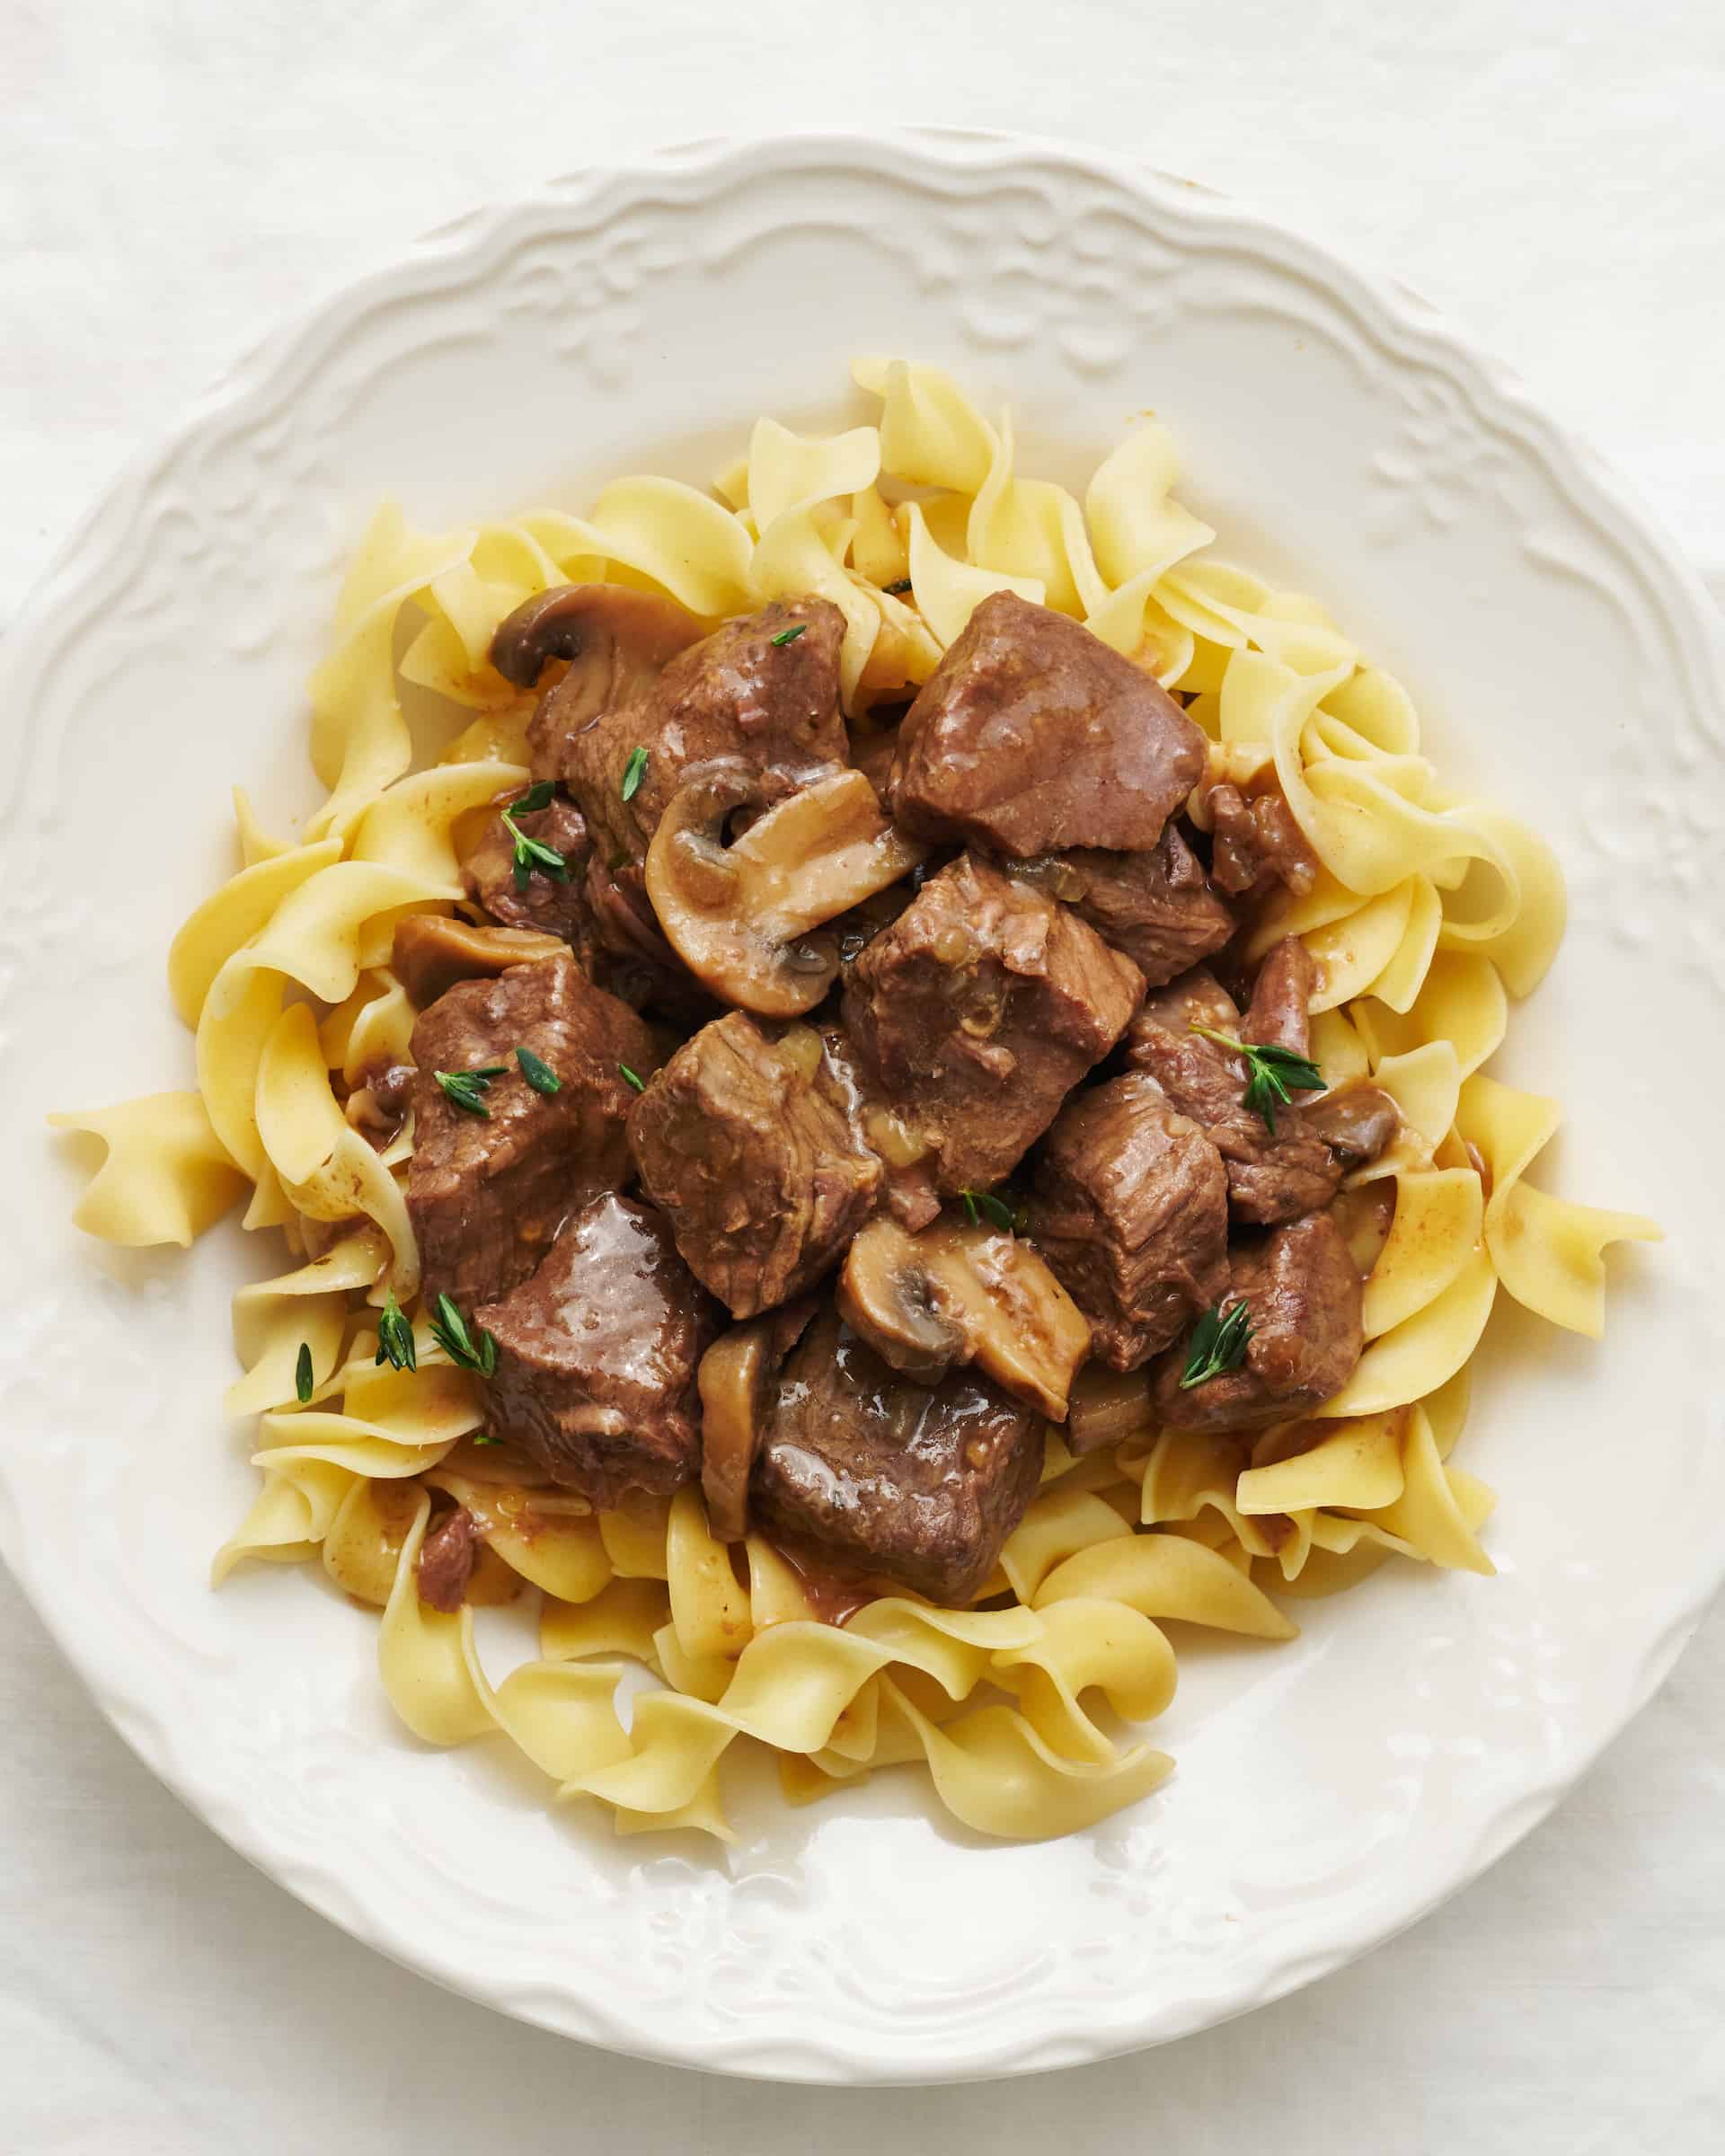 Overhead view of a plate of beef tips in gravy with mushrooms over noodles